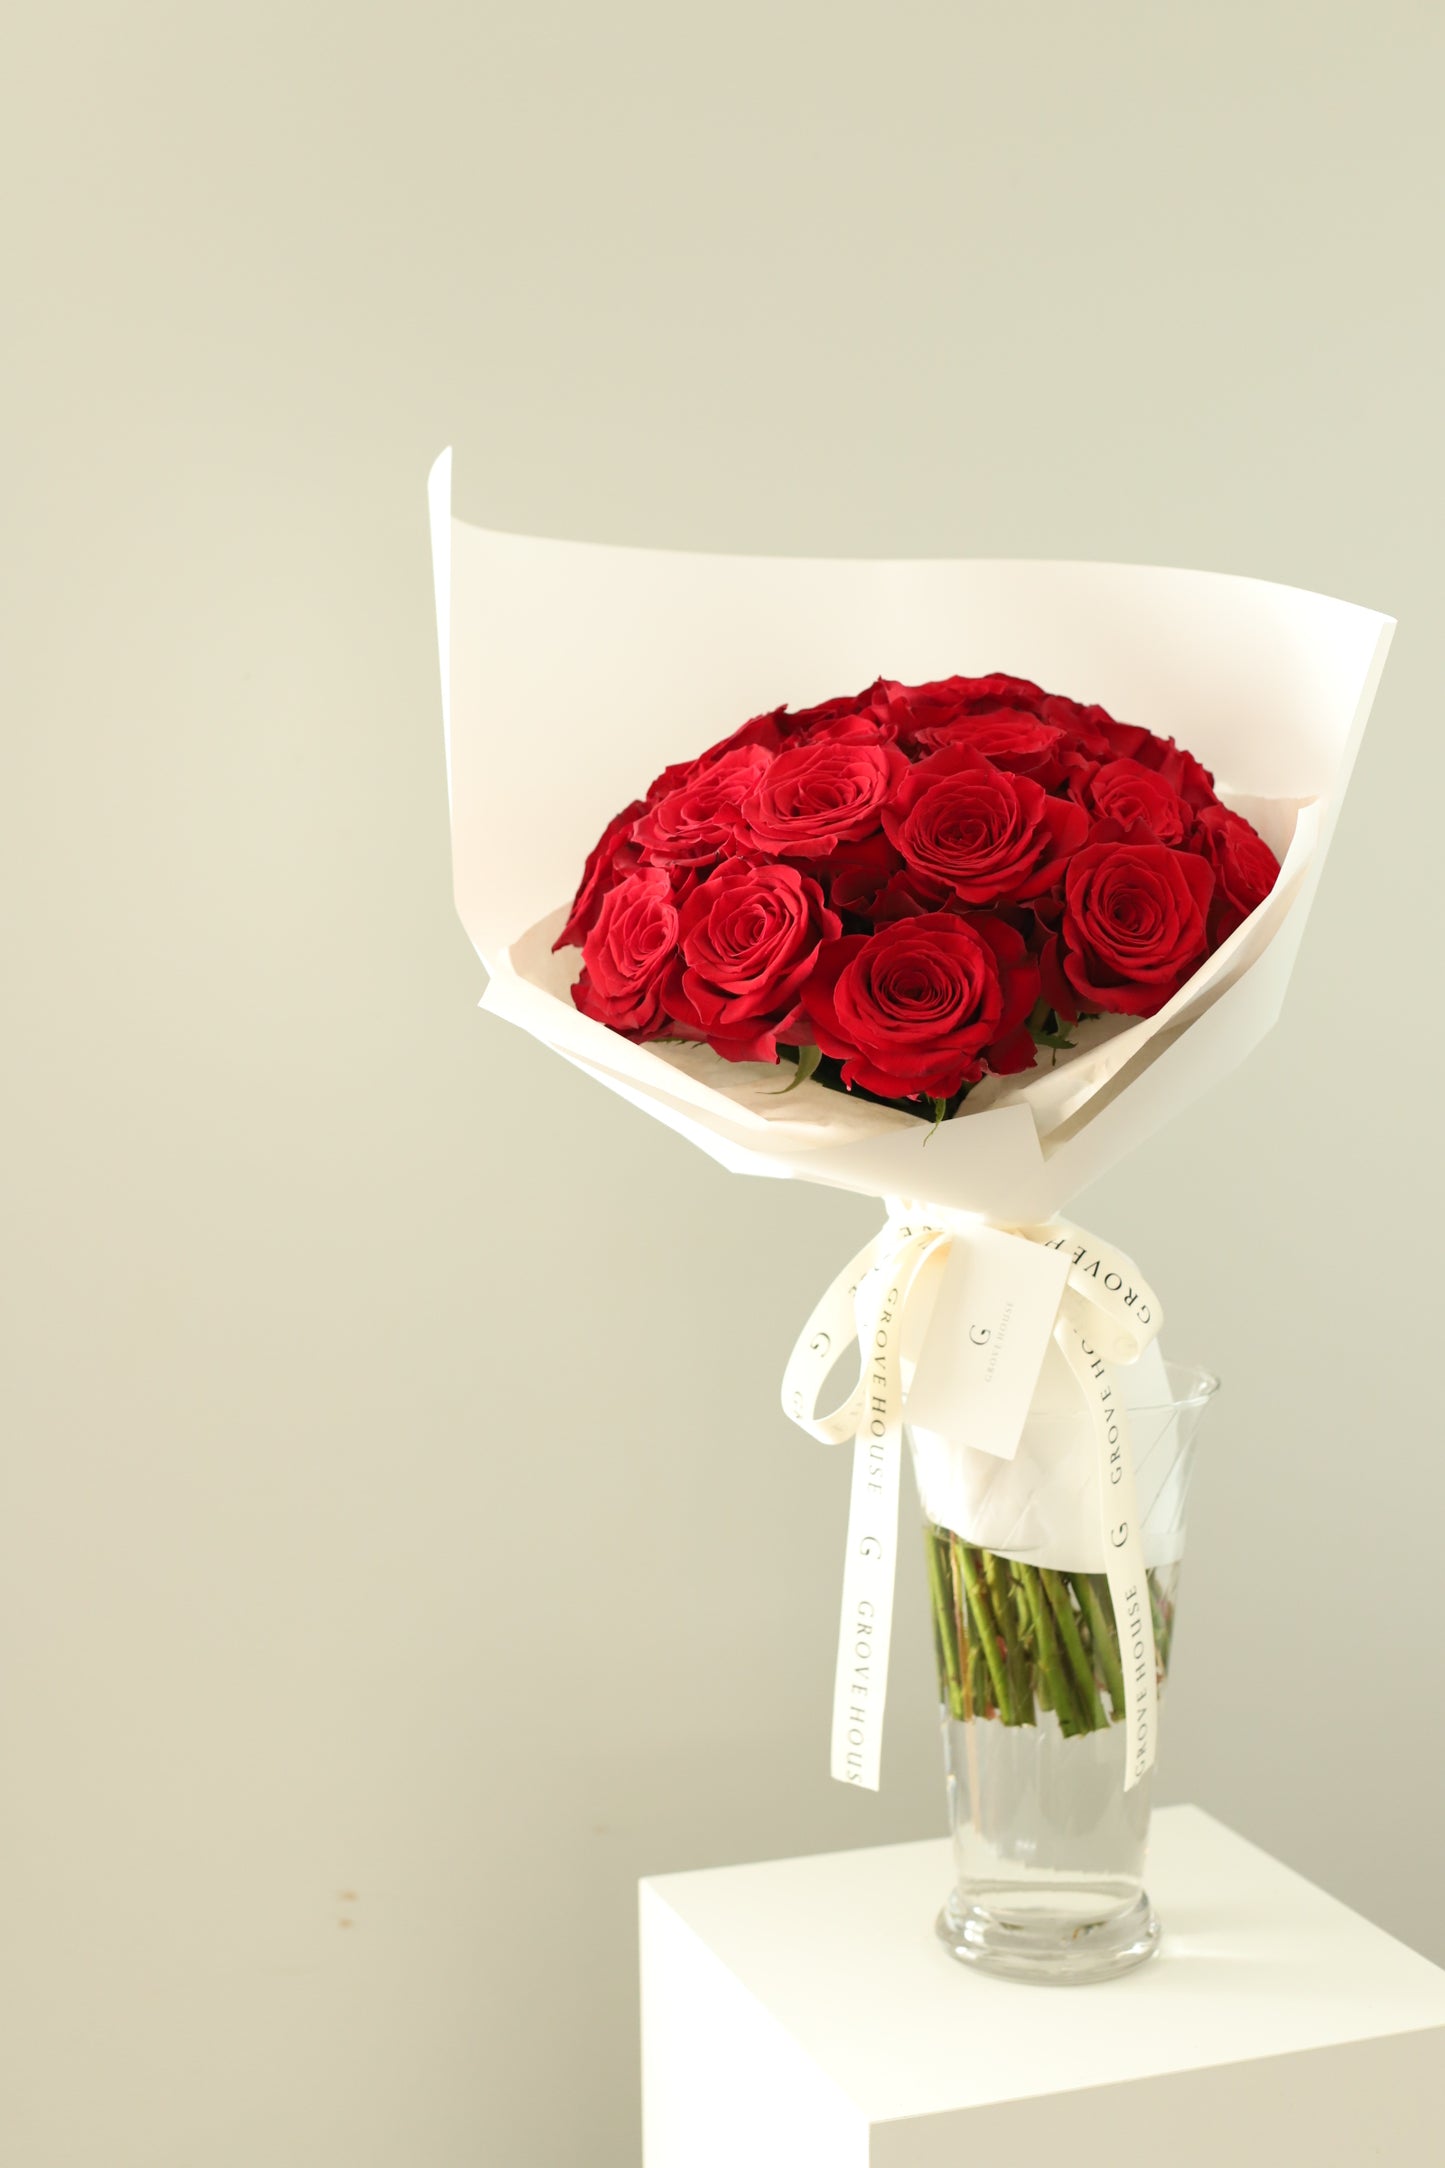 Premium Long-Stem Red Roses Wrapped Bouquet - Deluxe and Premium Options